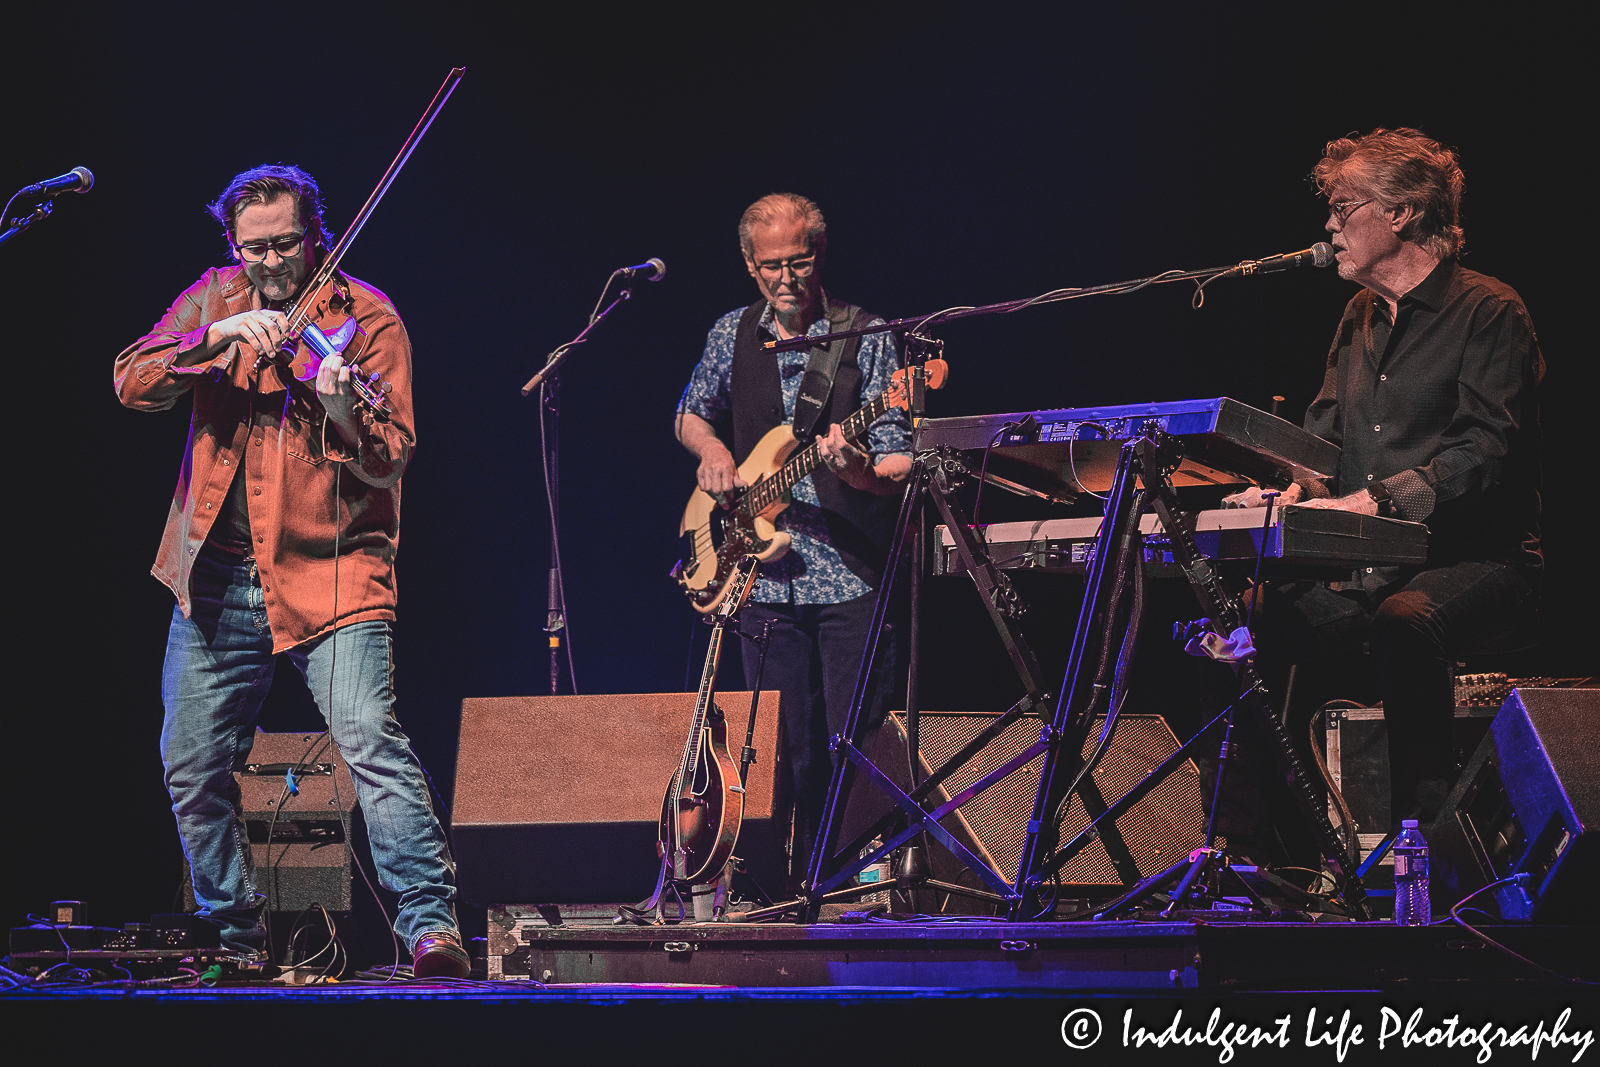 Nitty Gritty Dirt Band members Ross Holmes, Jim Photoglo and Bob Carpenter performing together at Ameristar Casino Hotel Kansas City on July 8, 2023.